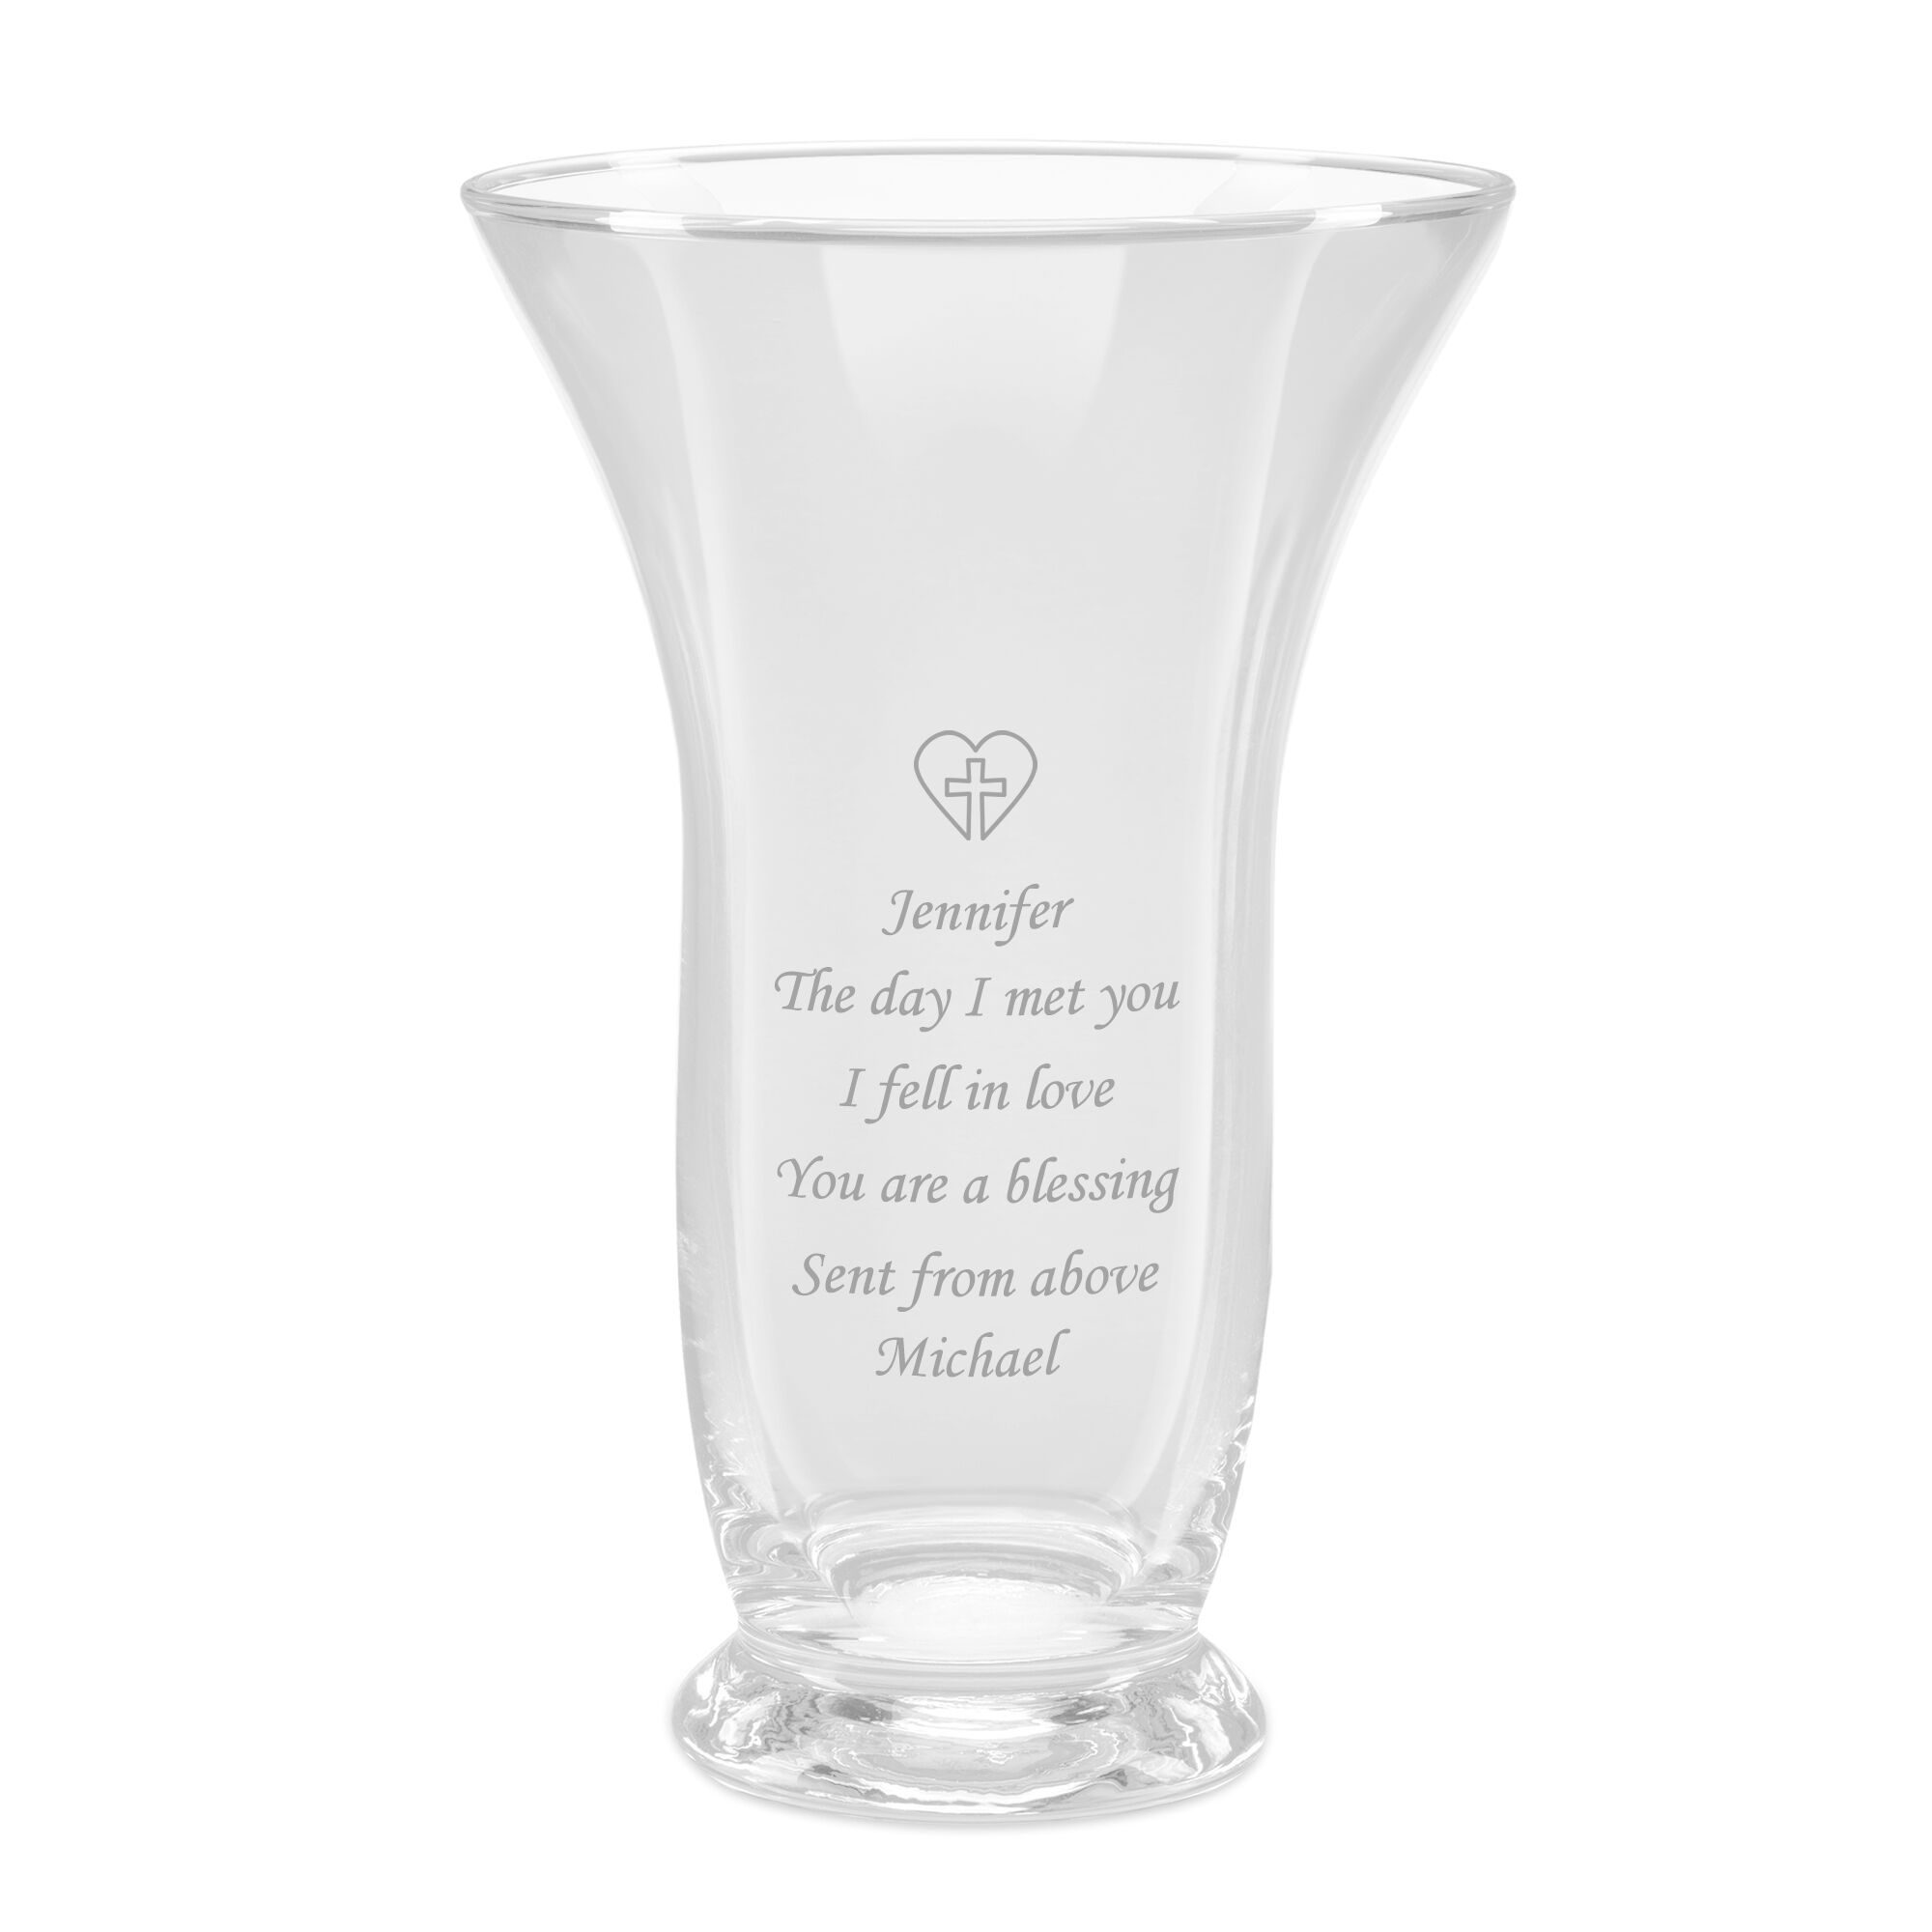 The Personalized Blessing Vase 10157 0034 a main